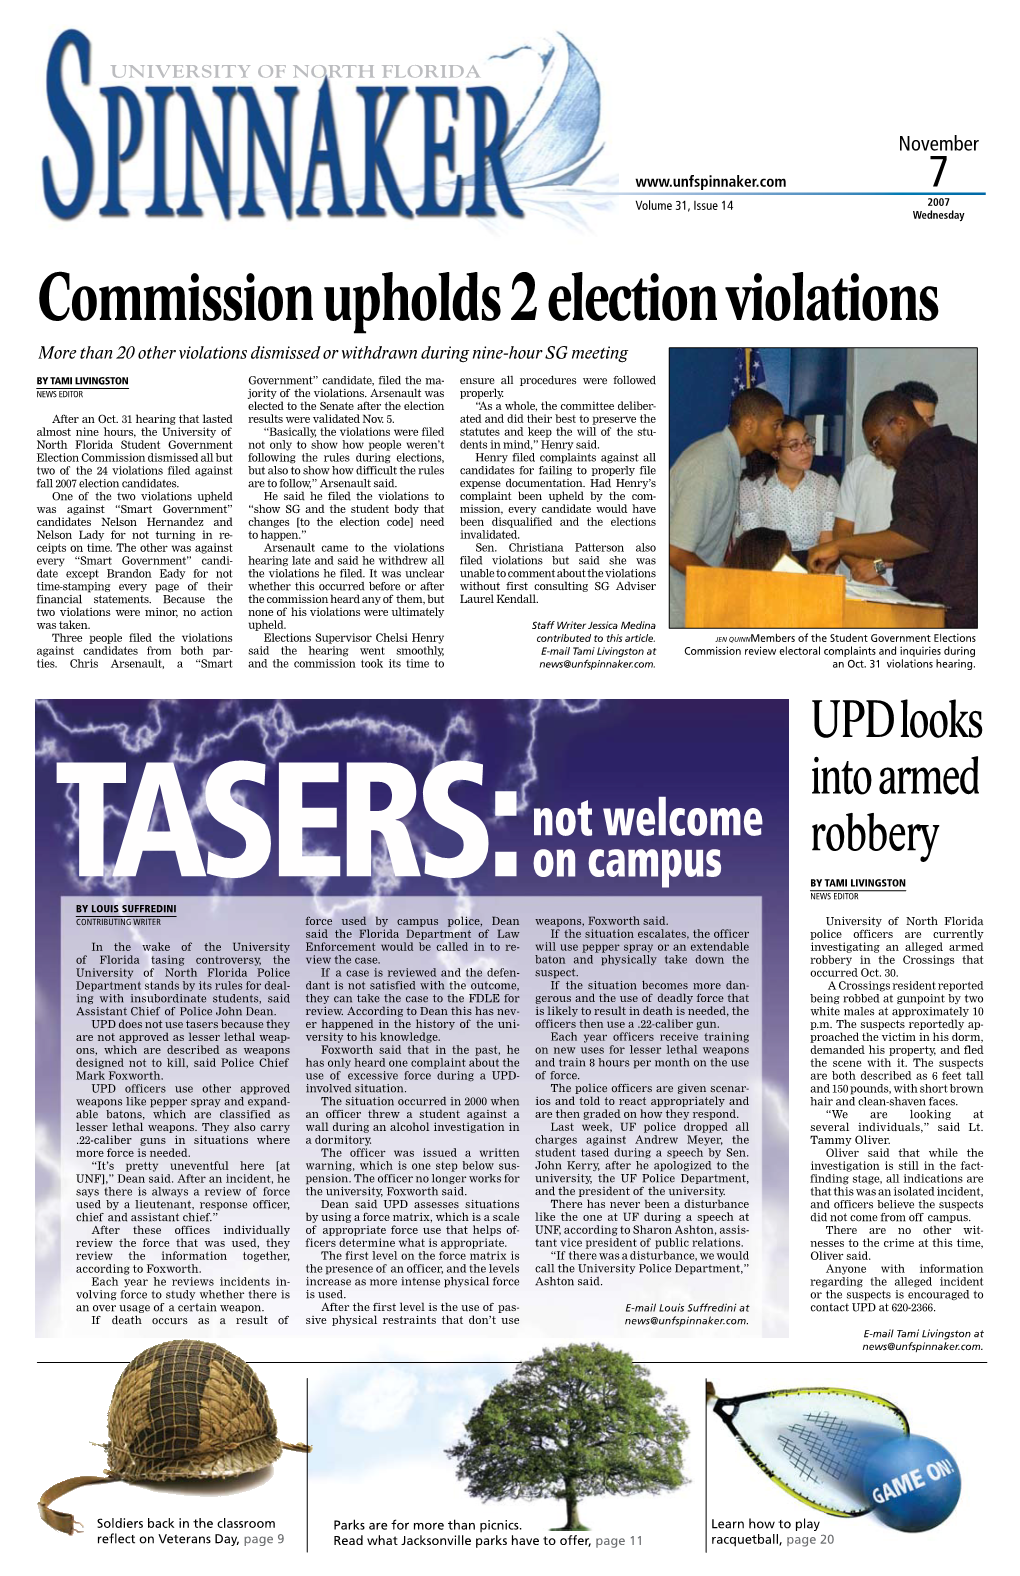 Commission Upholds 2 Election Violations More Than 20 Other Violations Dismissed Or Withdrawn During Nine-Hour SG Meeting